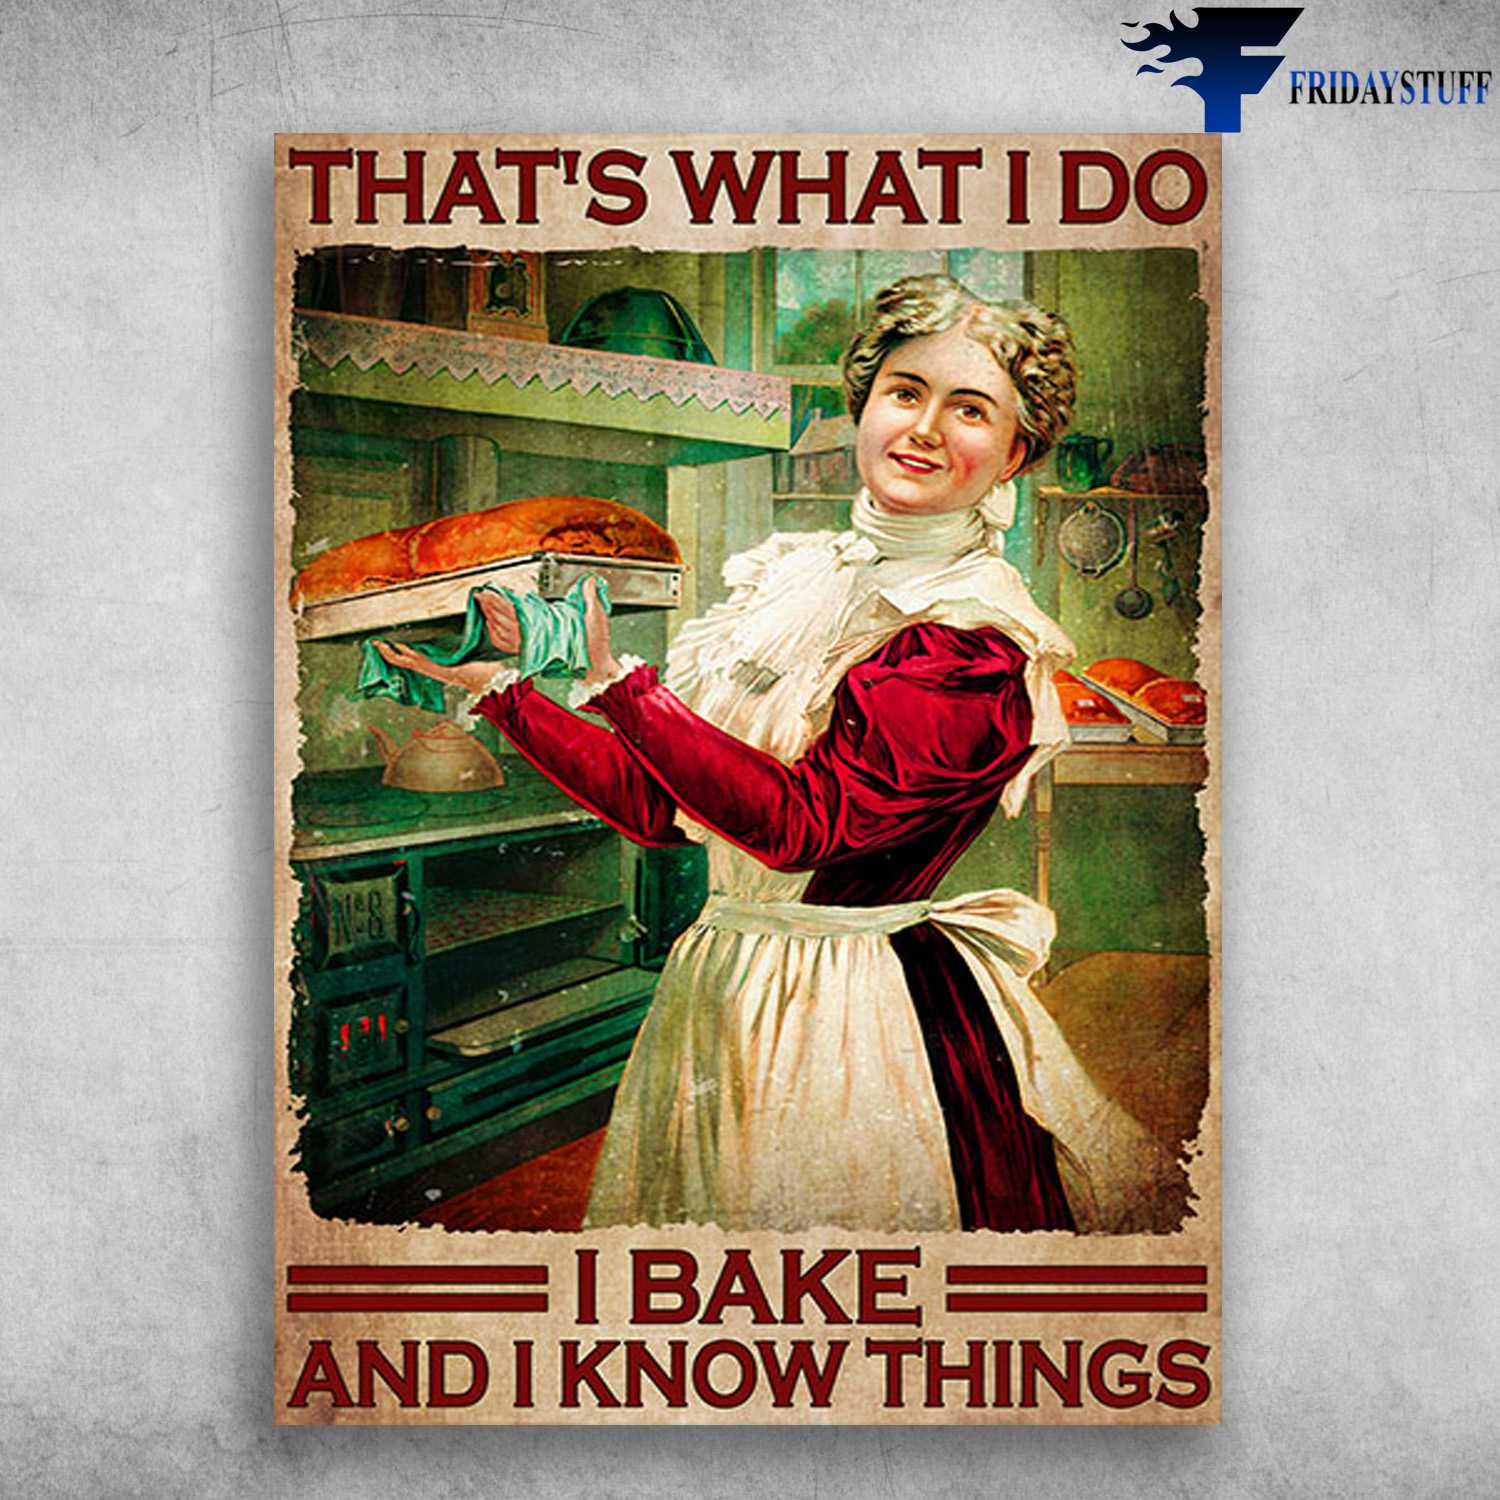 Woman Baking, Bakery Poster - That's What I Do, I Bake, And I Know Things